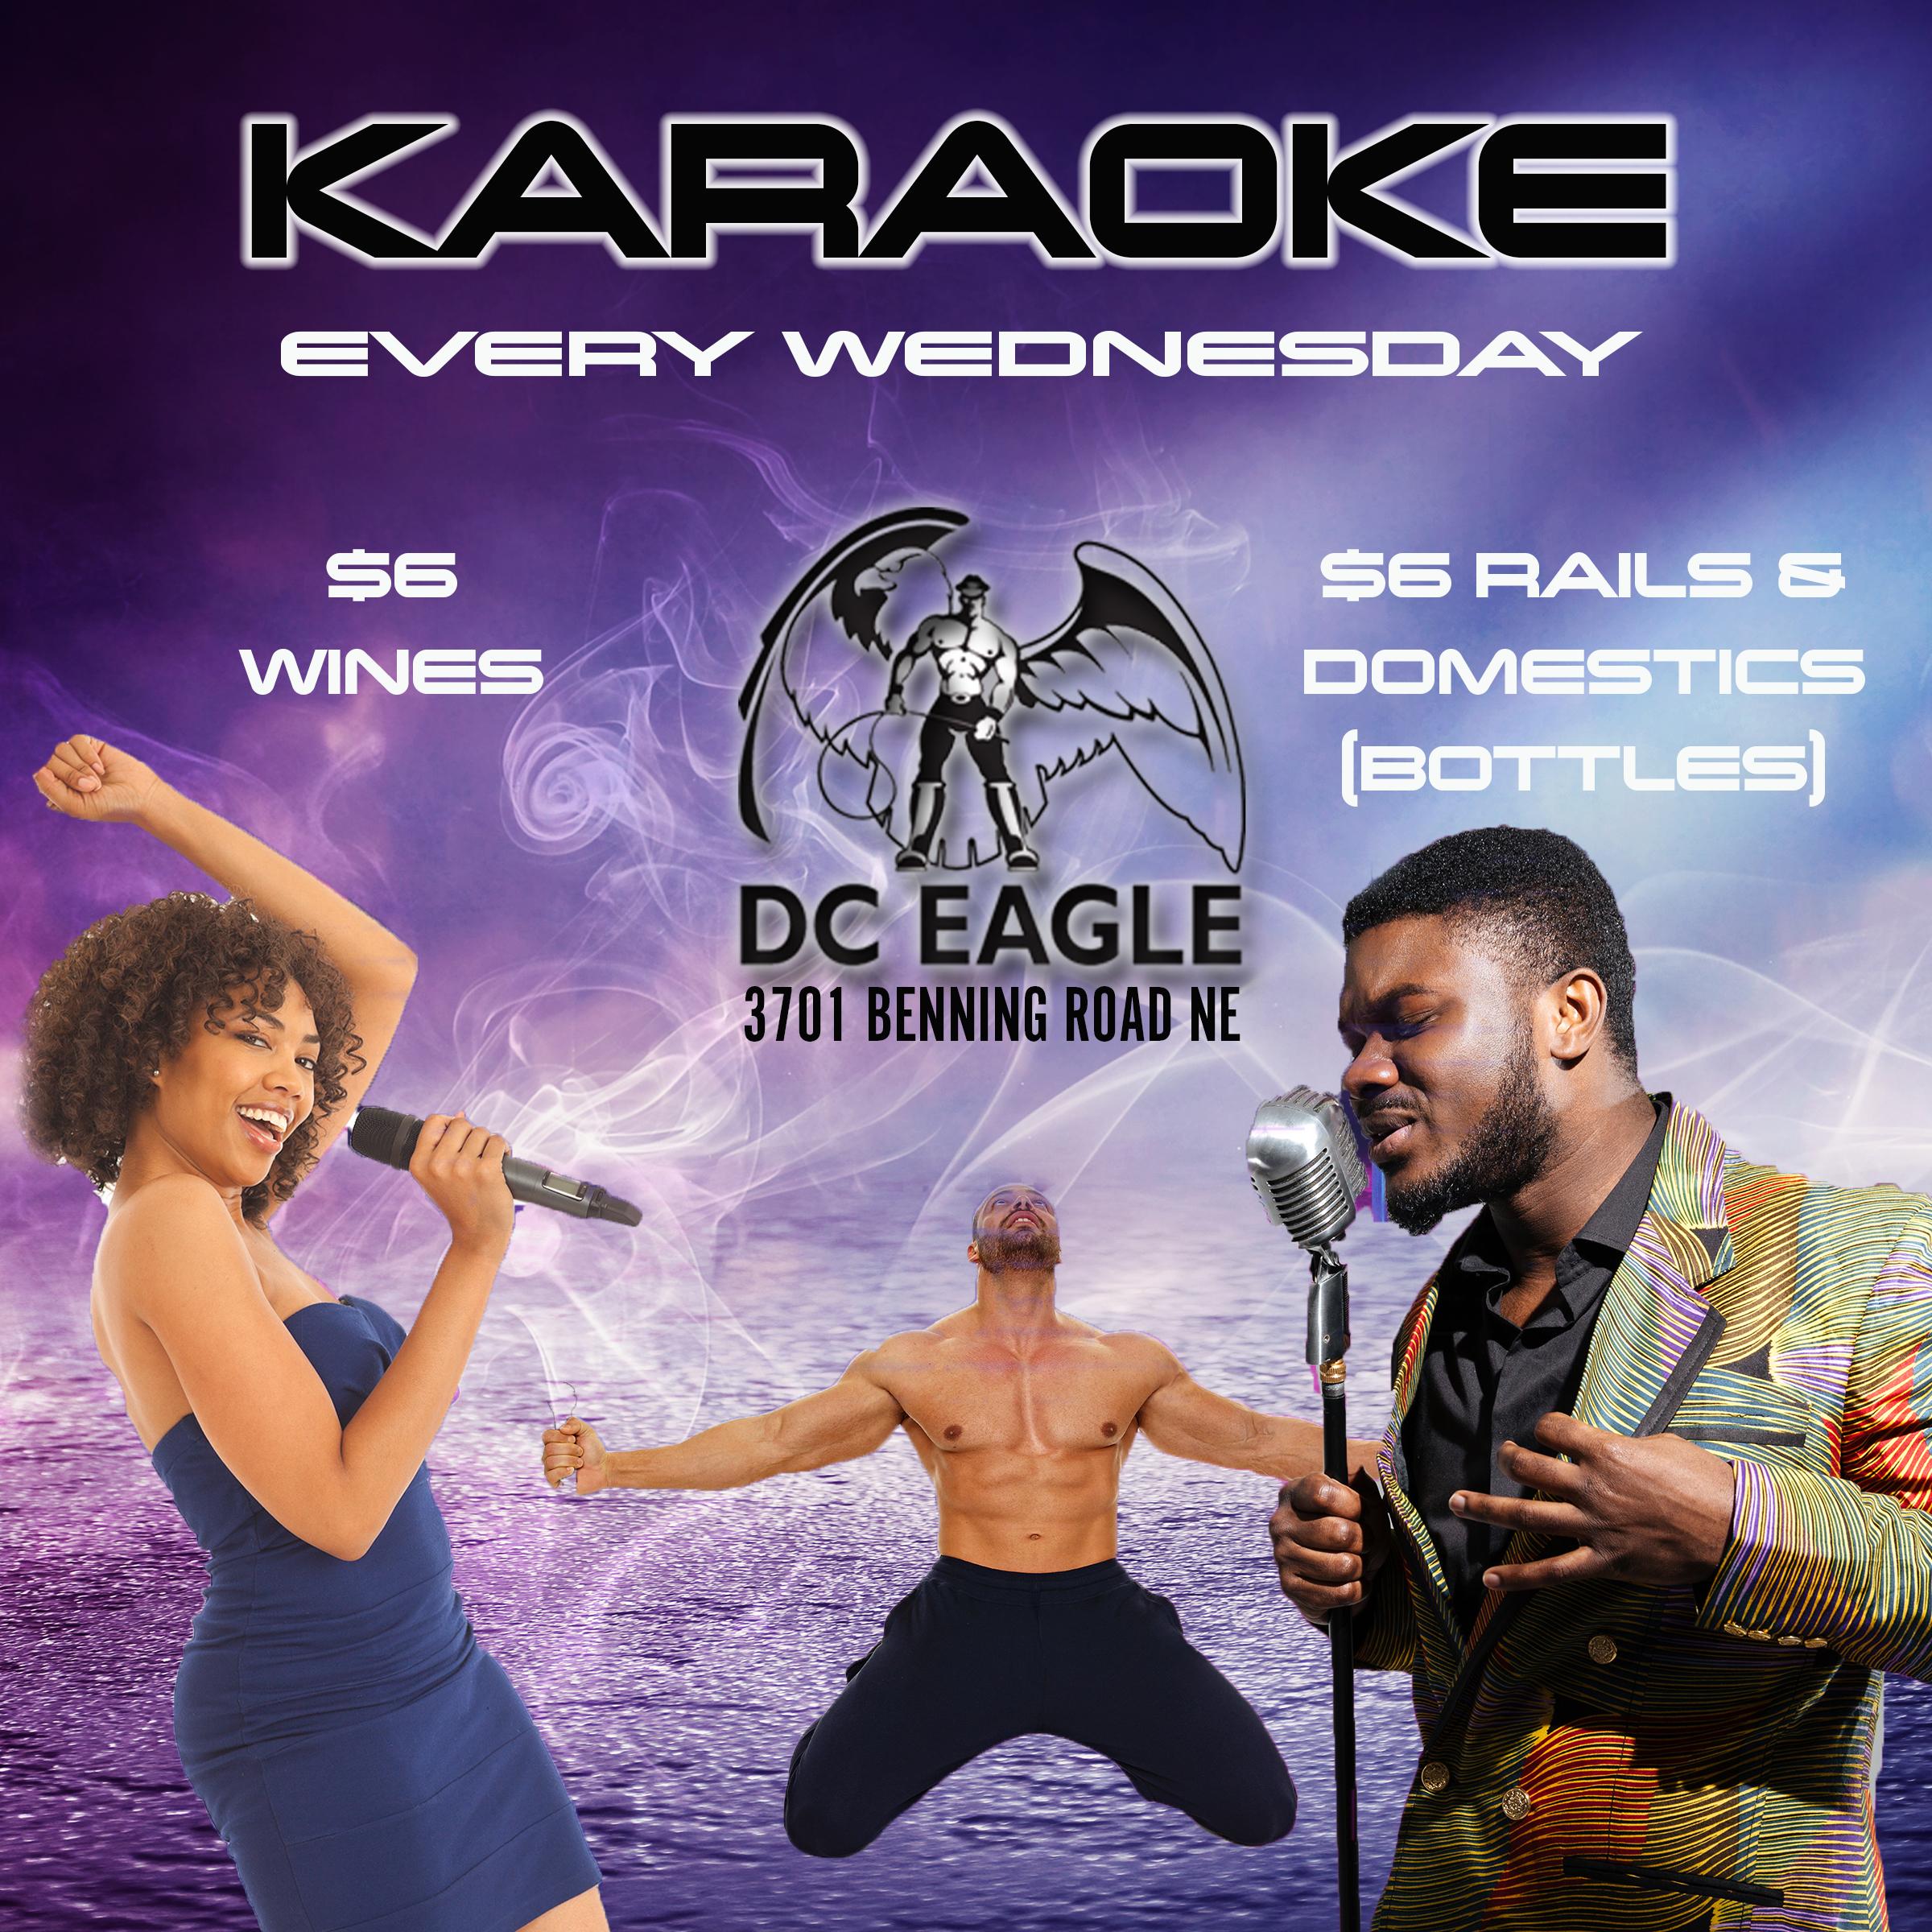 Karaoke EVERY WEDNESDAY at the DC Eagle